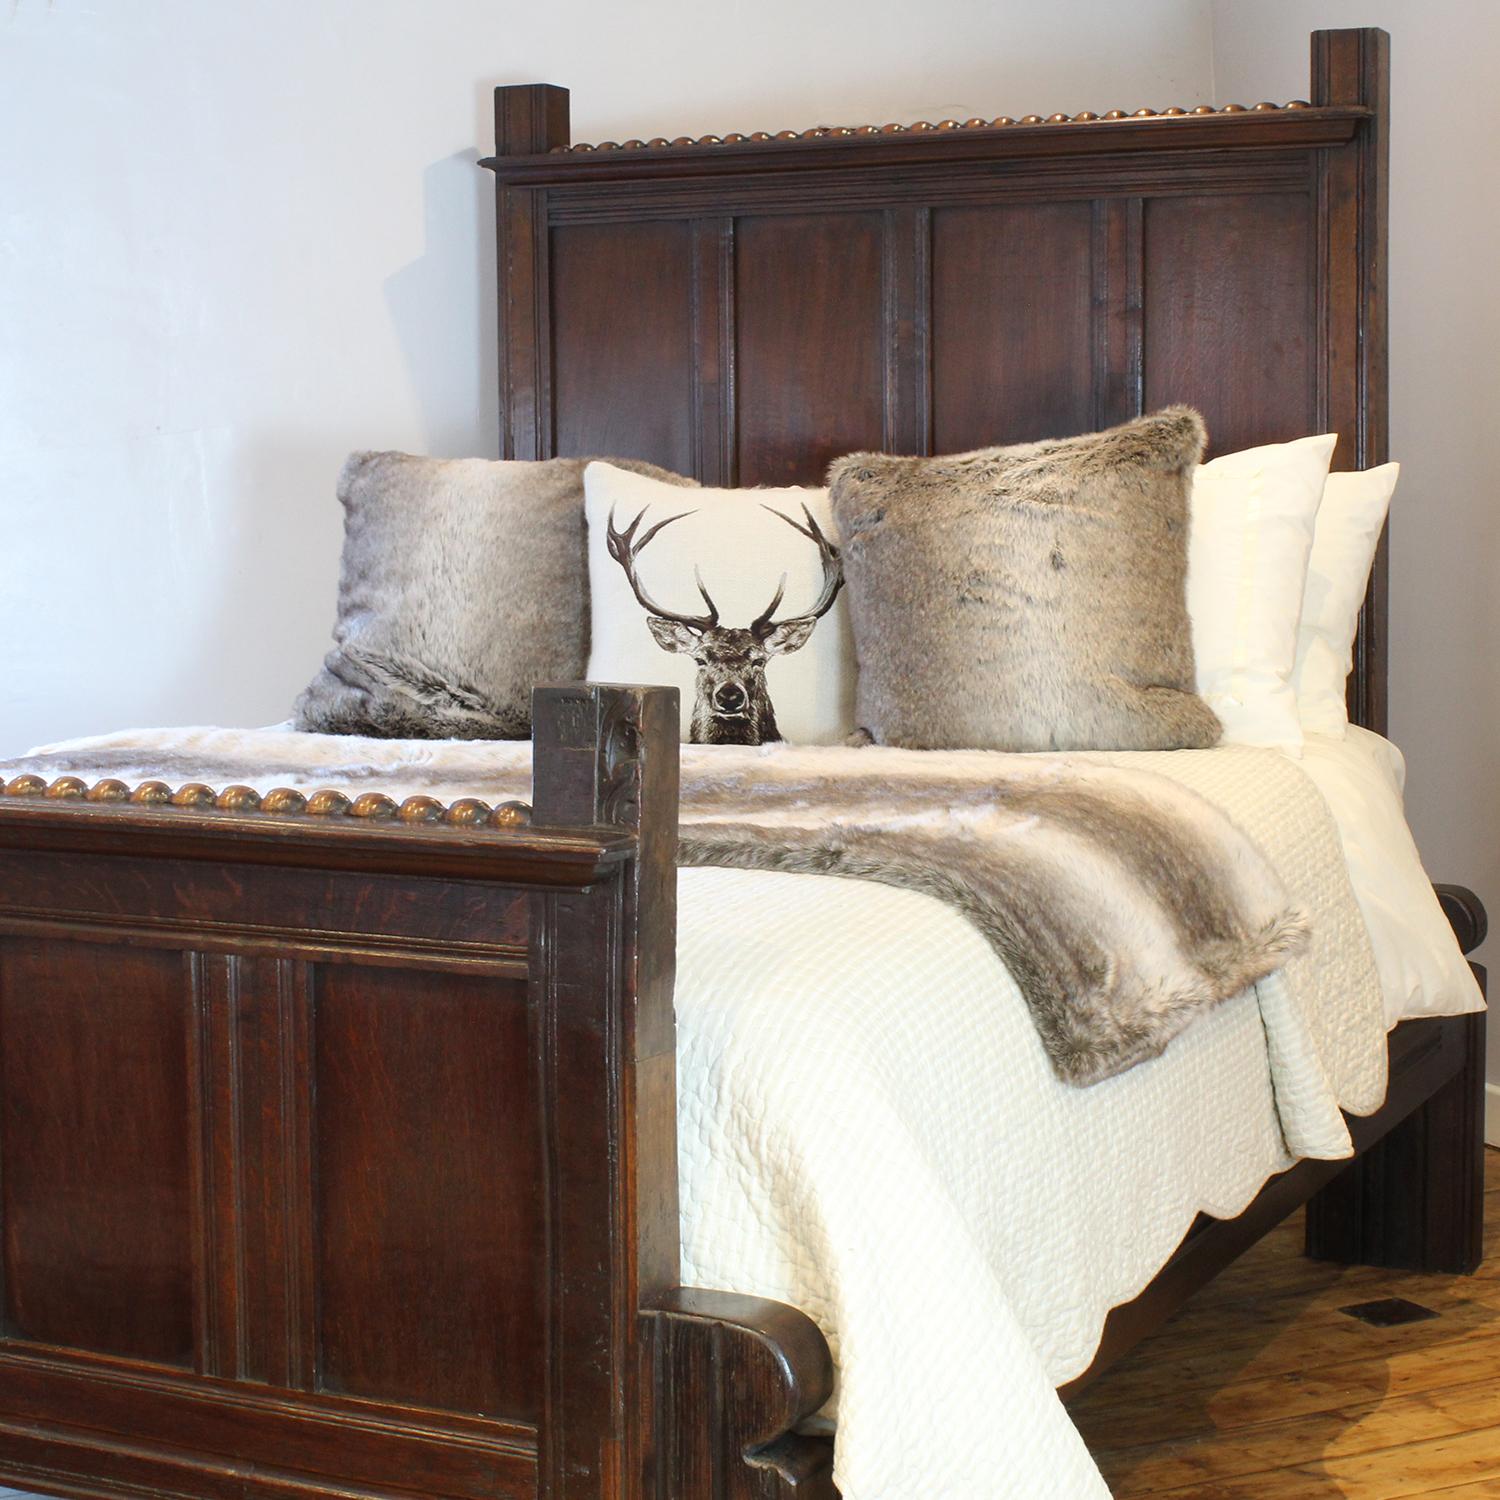 An exceptional oak bedstead with original panels dating as far back as the Eighteenth Century, with later alterations in the early Twentieth century. The panels may well have been from an oak four poster bed, with tall posts. In the early part of